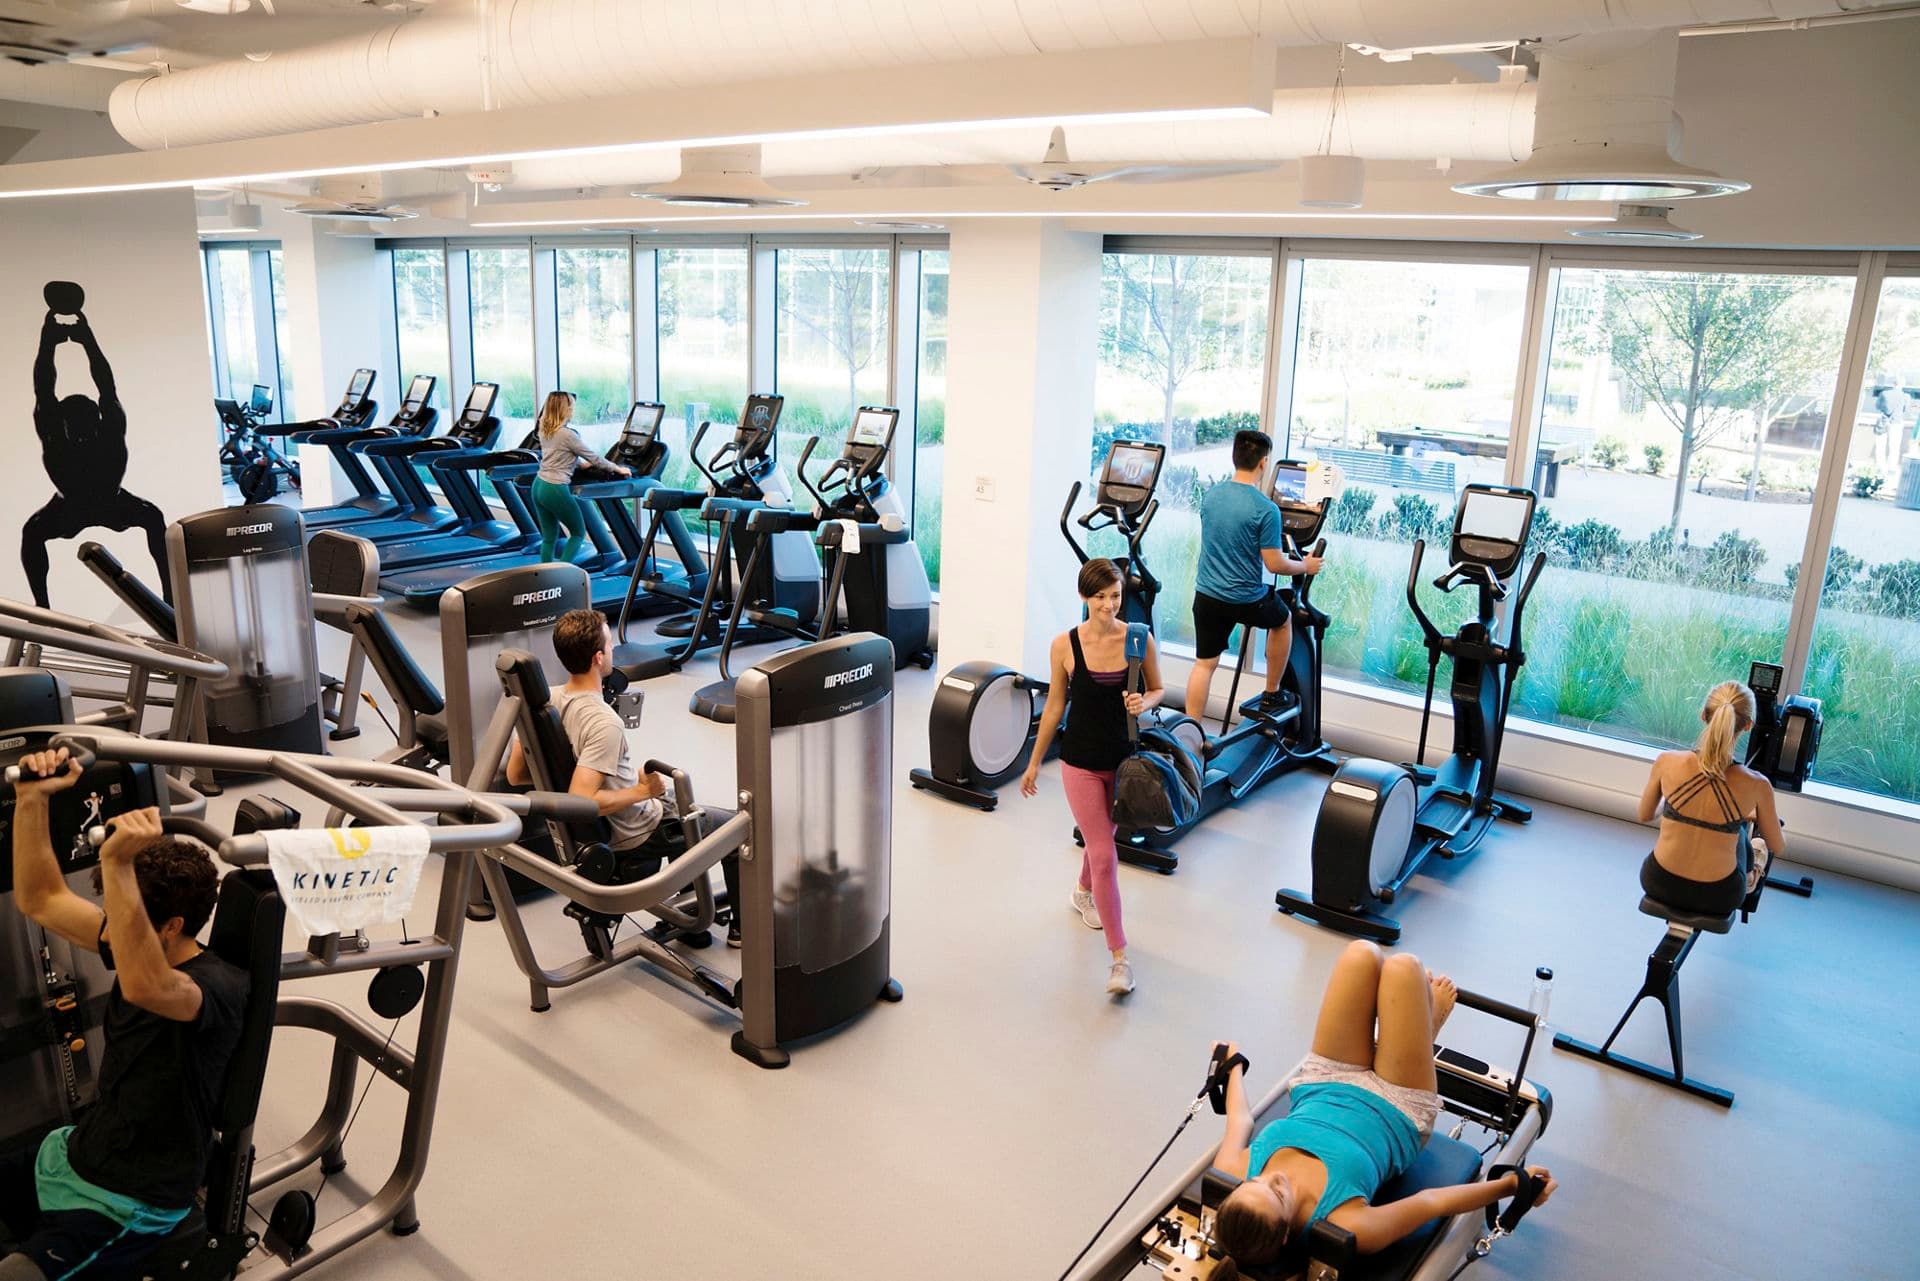 Lifestyle photography of the KINETIC™ fitness center at 530 Technology Drive - Discovery Park in Irvine, CA